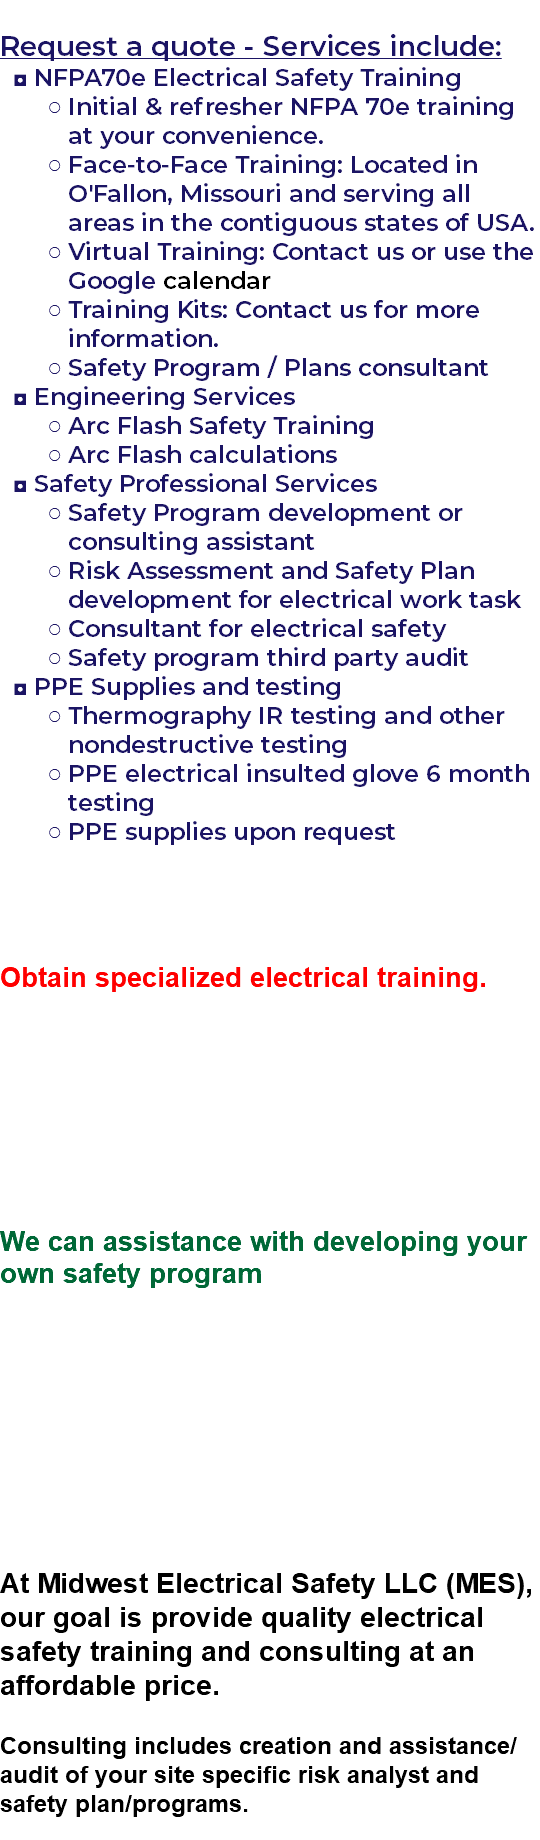  Request a quote - Services include: NFPA70e Electrical Safety Training Initial & refresher NFPA 70e training at your convenience. Face-to-Face Training: Located in O'Fallon, Missouri and serving all areas in the contiguous states of USA. Virtual Training: Contact us or use the Google calendar Training Kits: Contact us for more information. Safety Program / Plans consultant Engineering Services Arc Flash Safety Training Arc Flash calculations Safety Professional Services Safety Program development or consulting assistant Risk Assessment and Safety Plan development for electrical work task Consultant for electrical safety Safety program third party audit PPE Supplies and testing Thermography IR testing and other nondestructive testing PPE electrical insulted glove 6 month testing PPE supplies upon request Obtain specialized electrical training. We can assistance with developing your own safety program At Midwest Electrical Safety LLC (MES), our goal is provide quality electrical safety training and consulting at an affordable price. Consulting includes creation and assistance/audit of your site specific risk analyst and safety plan/programs. 